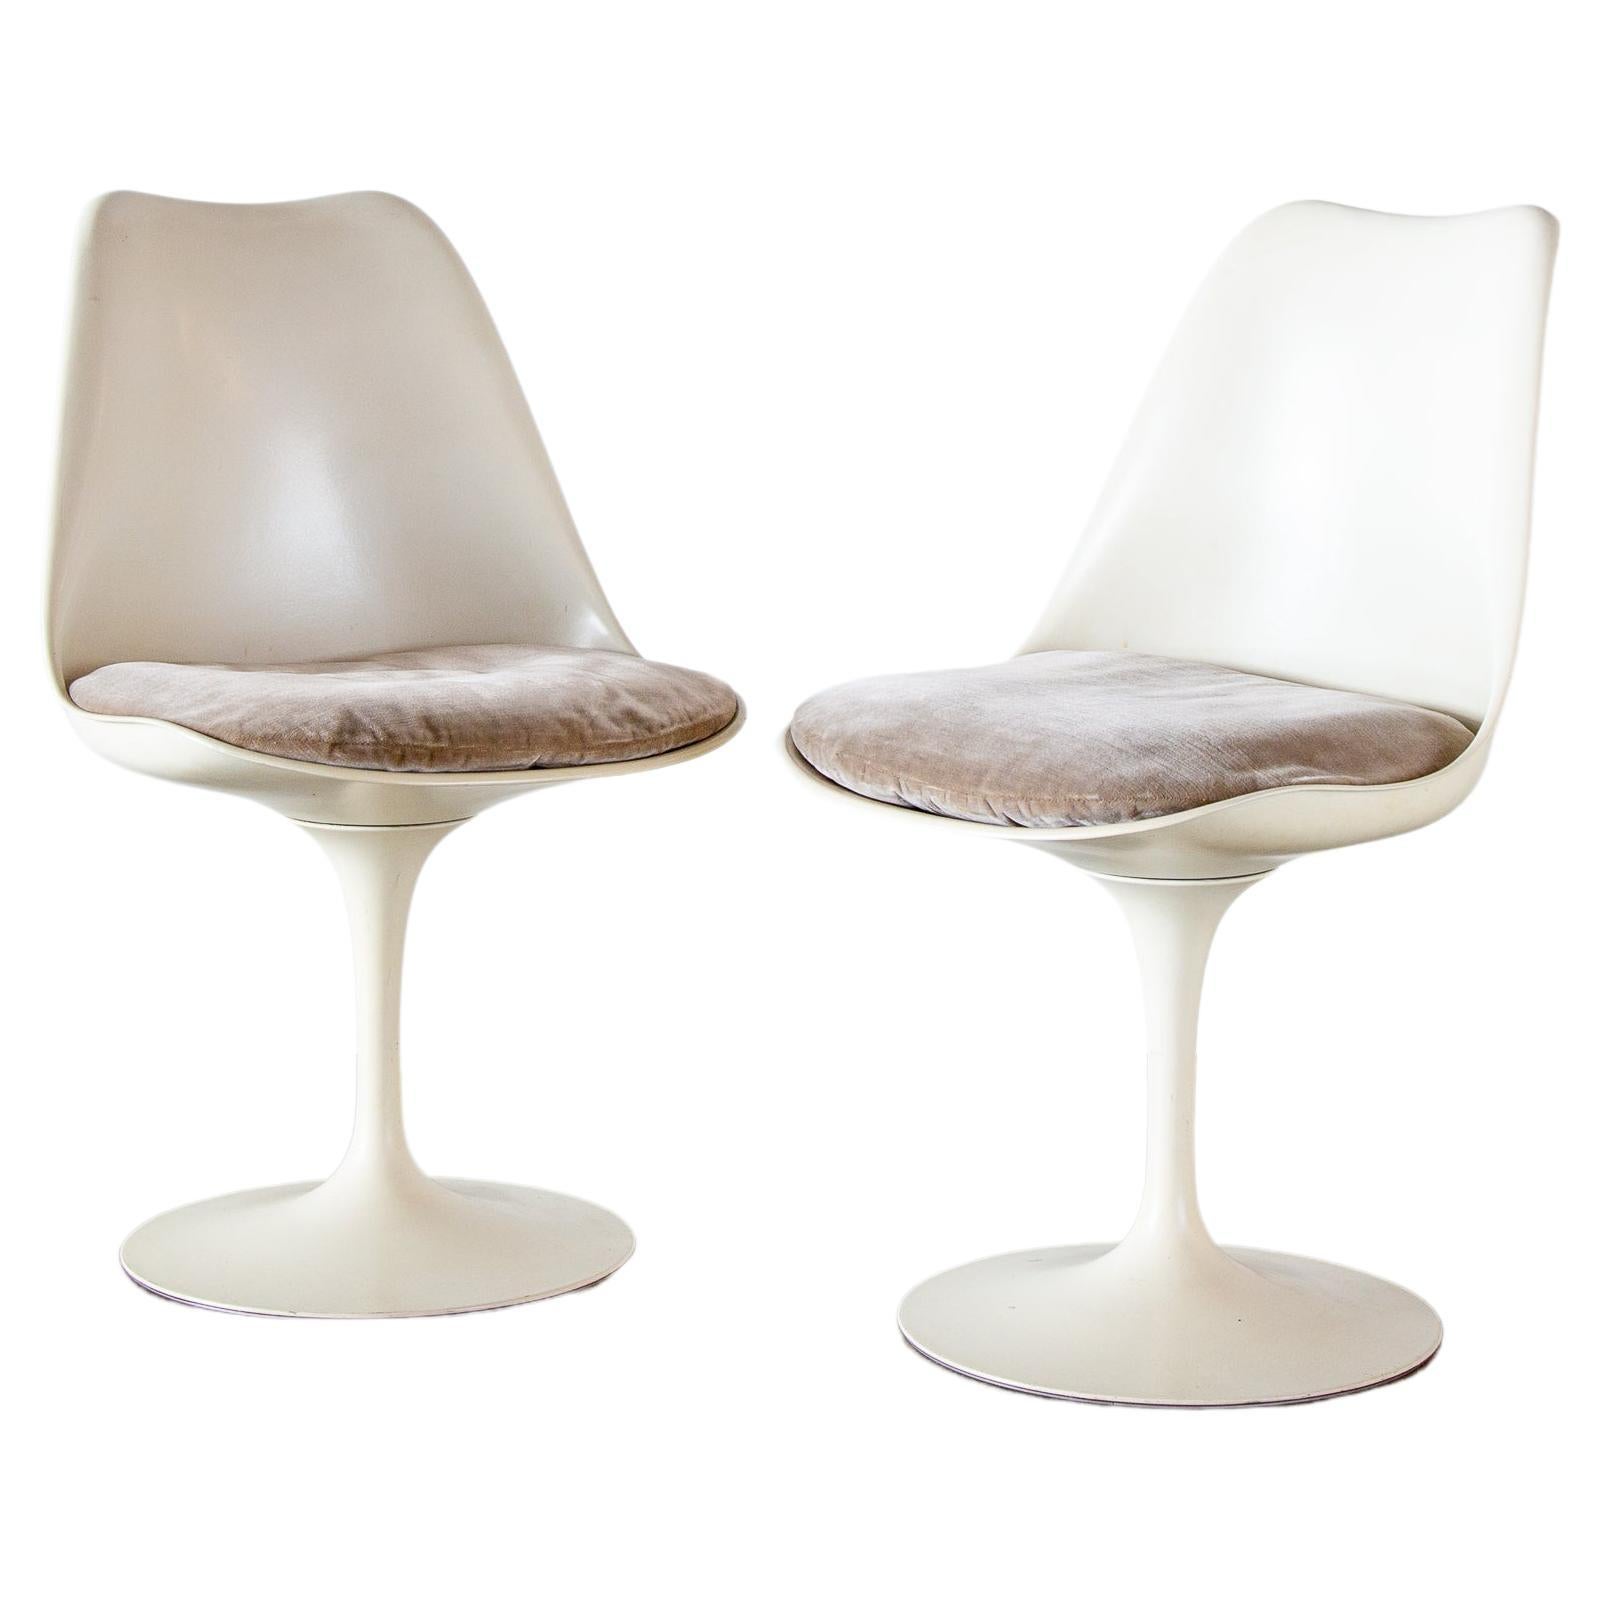 1950s Early Tulip Swivel Chairs by Eero Saarinen for Knoll - a pair